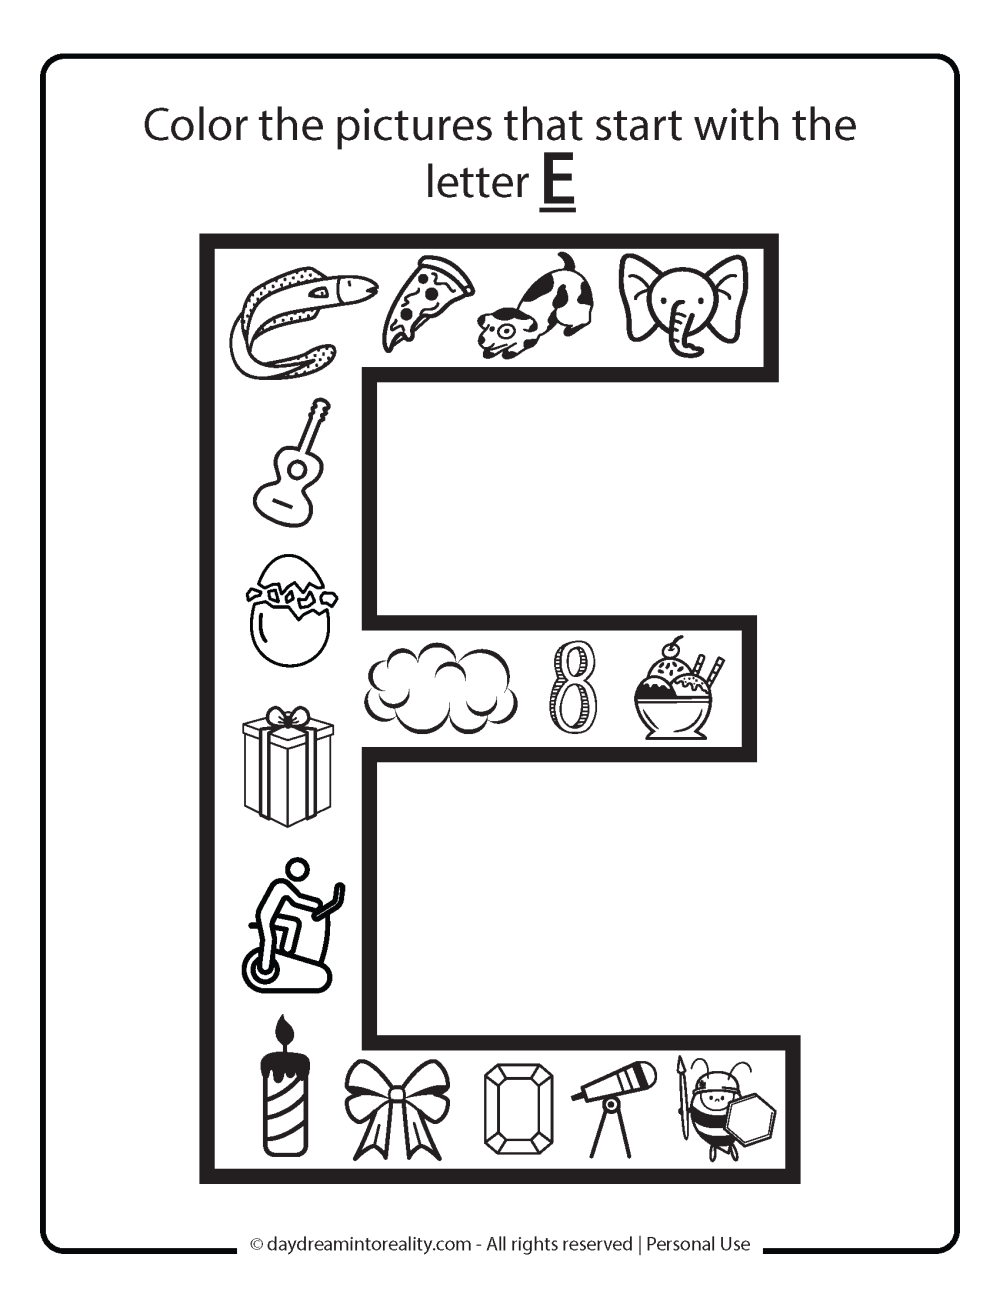 Letter E worksheet free printables - color picture that starts with E